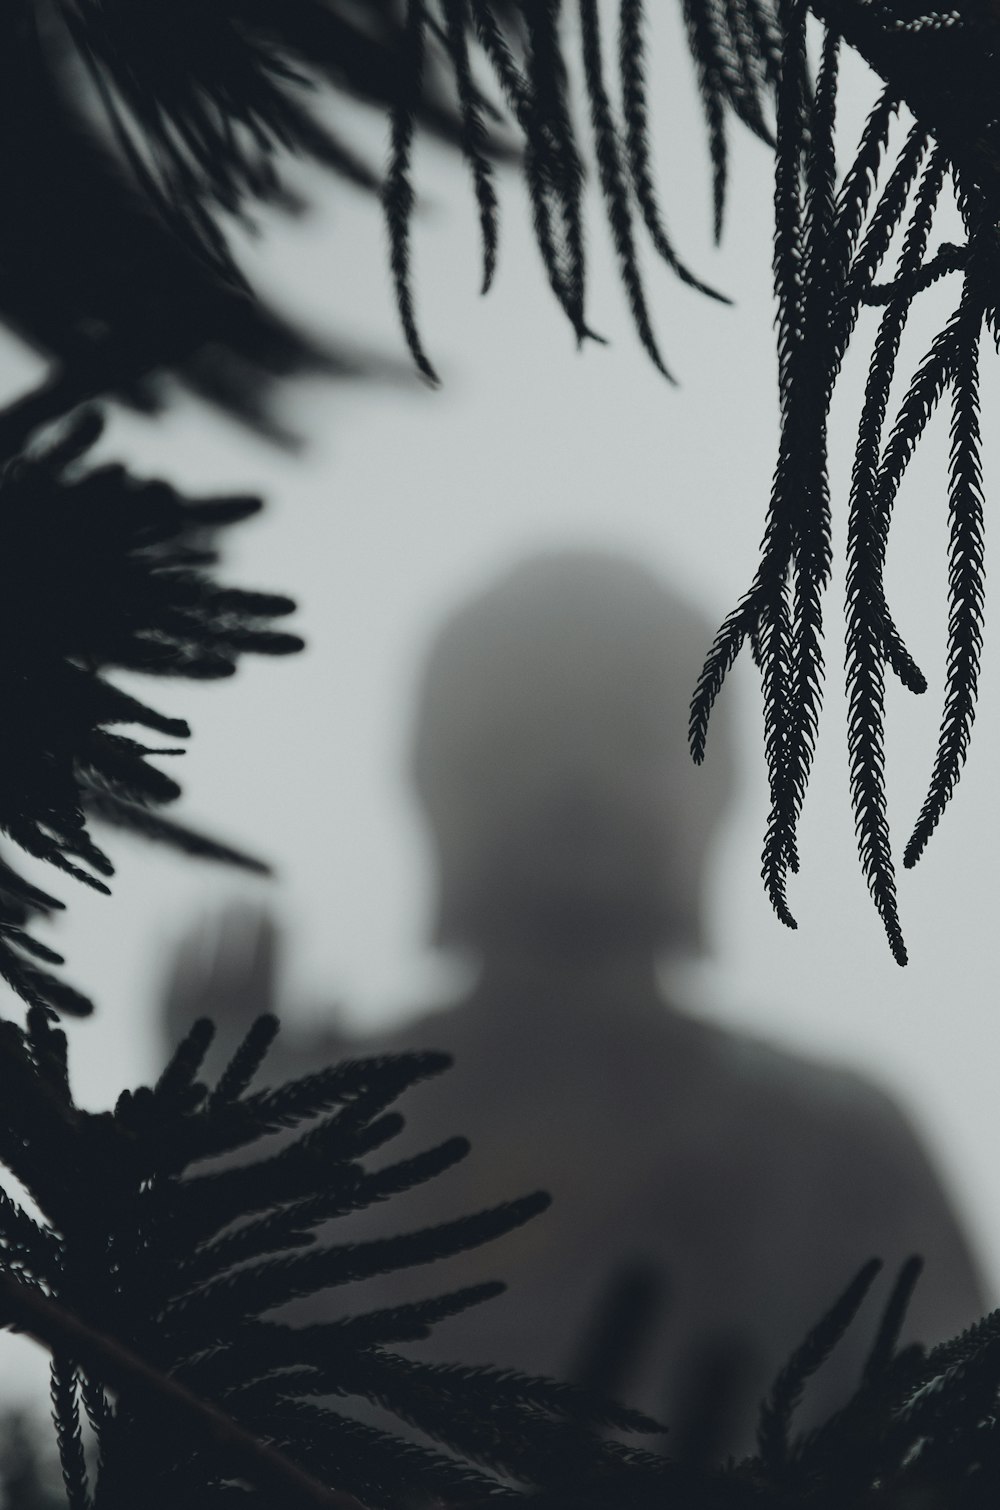 silhouette of person standing near tree